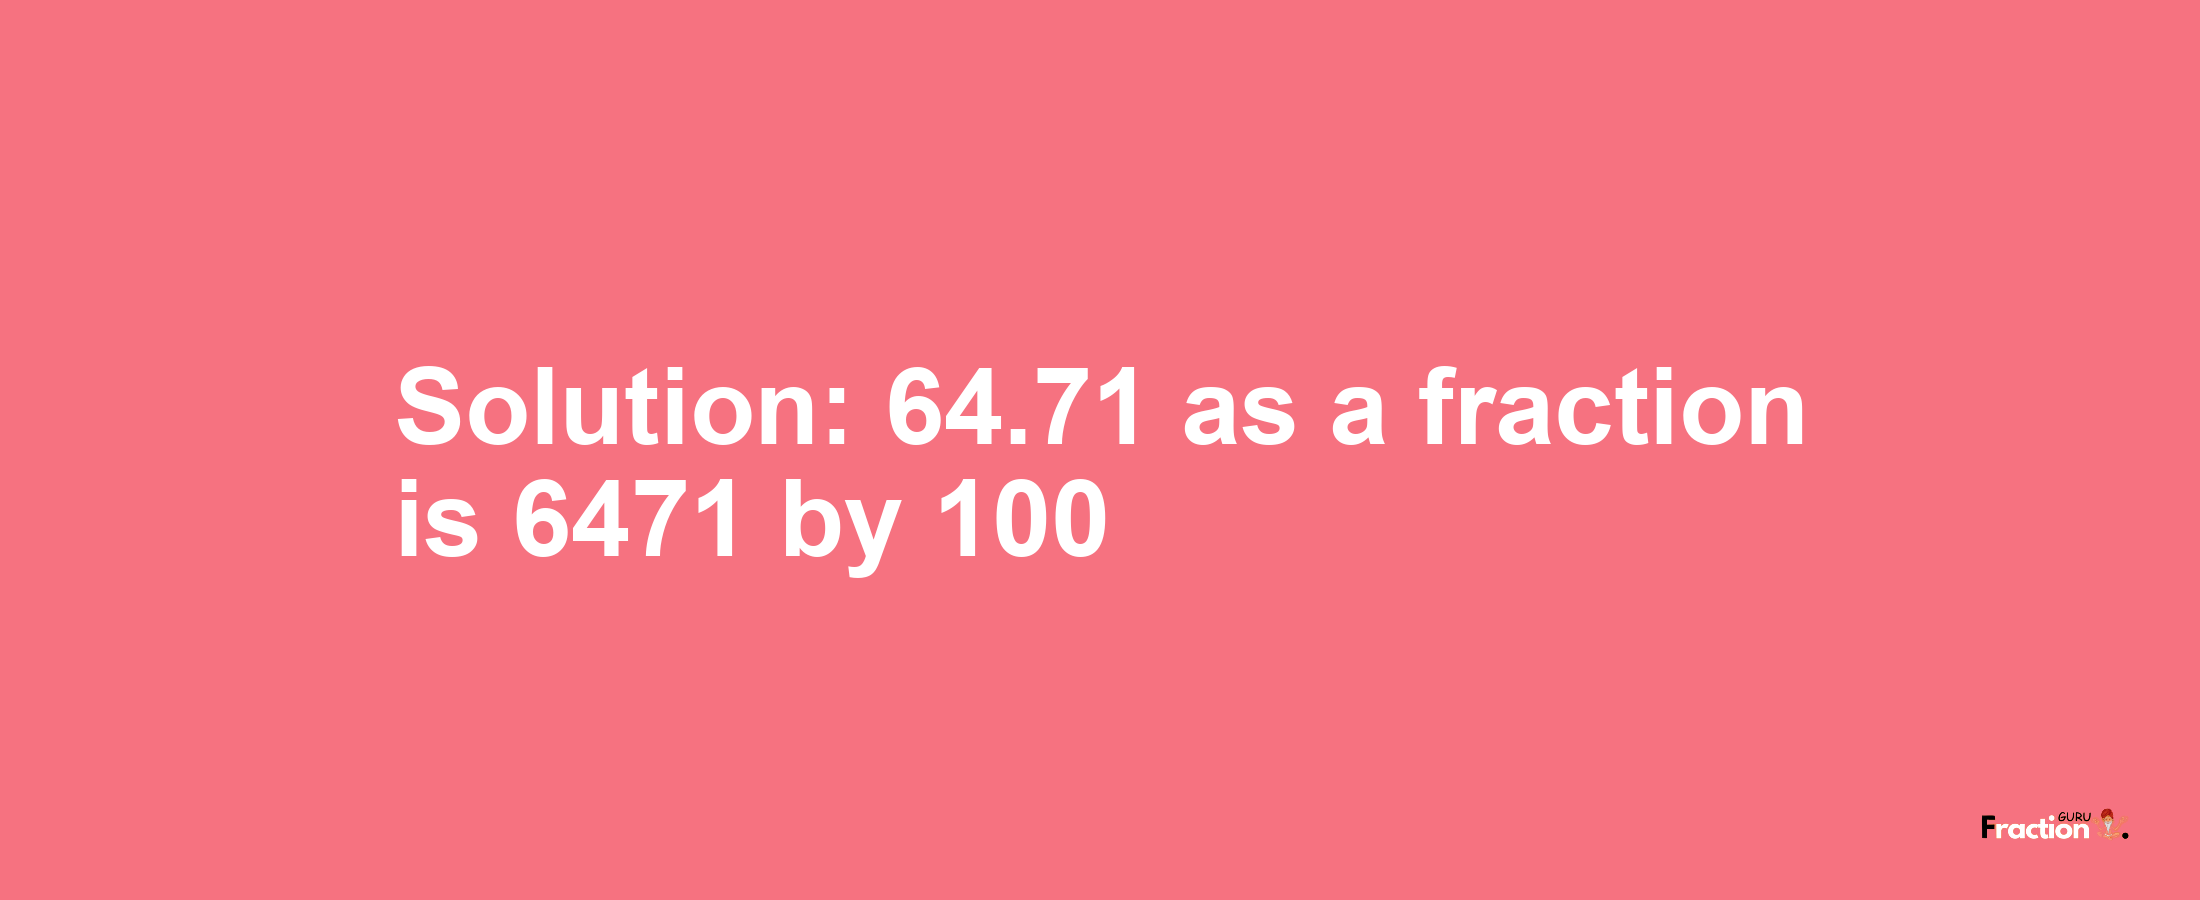 Solution:64.71 as a fraction is 6471/100